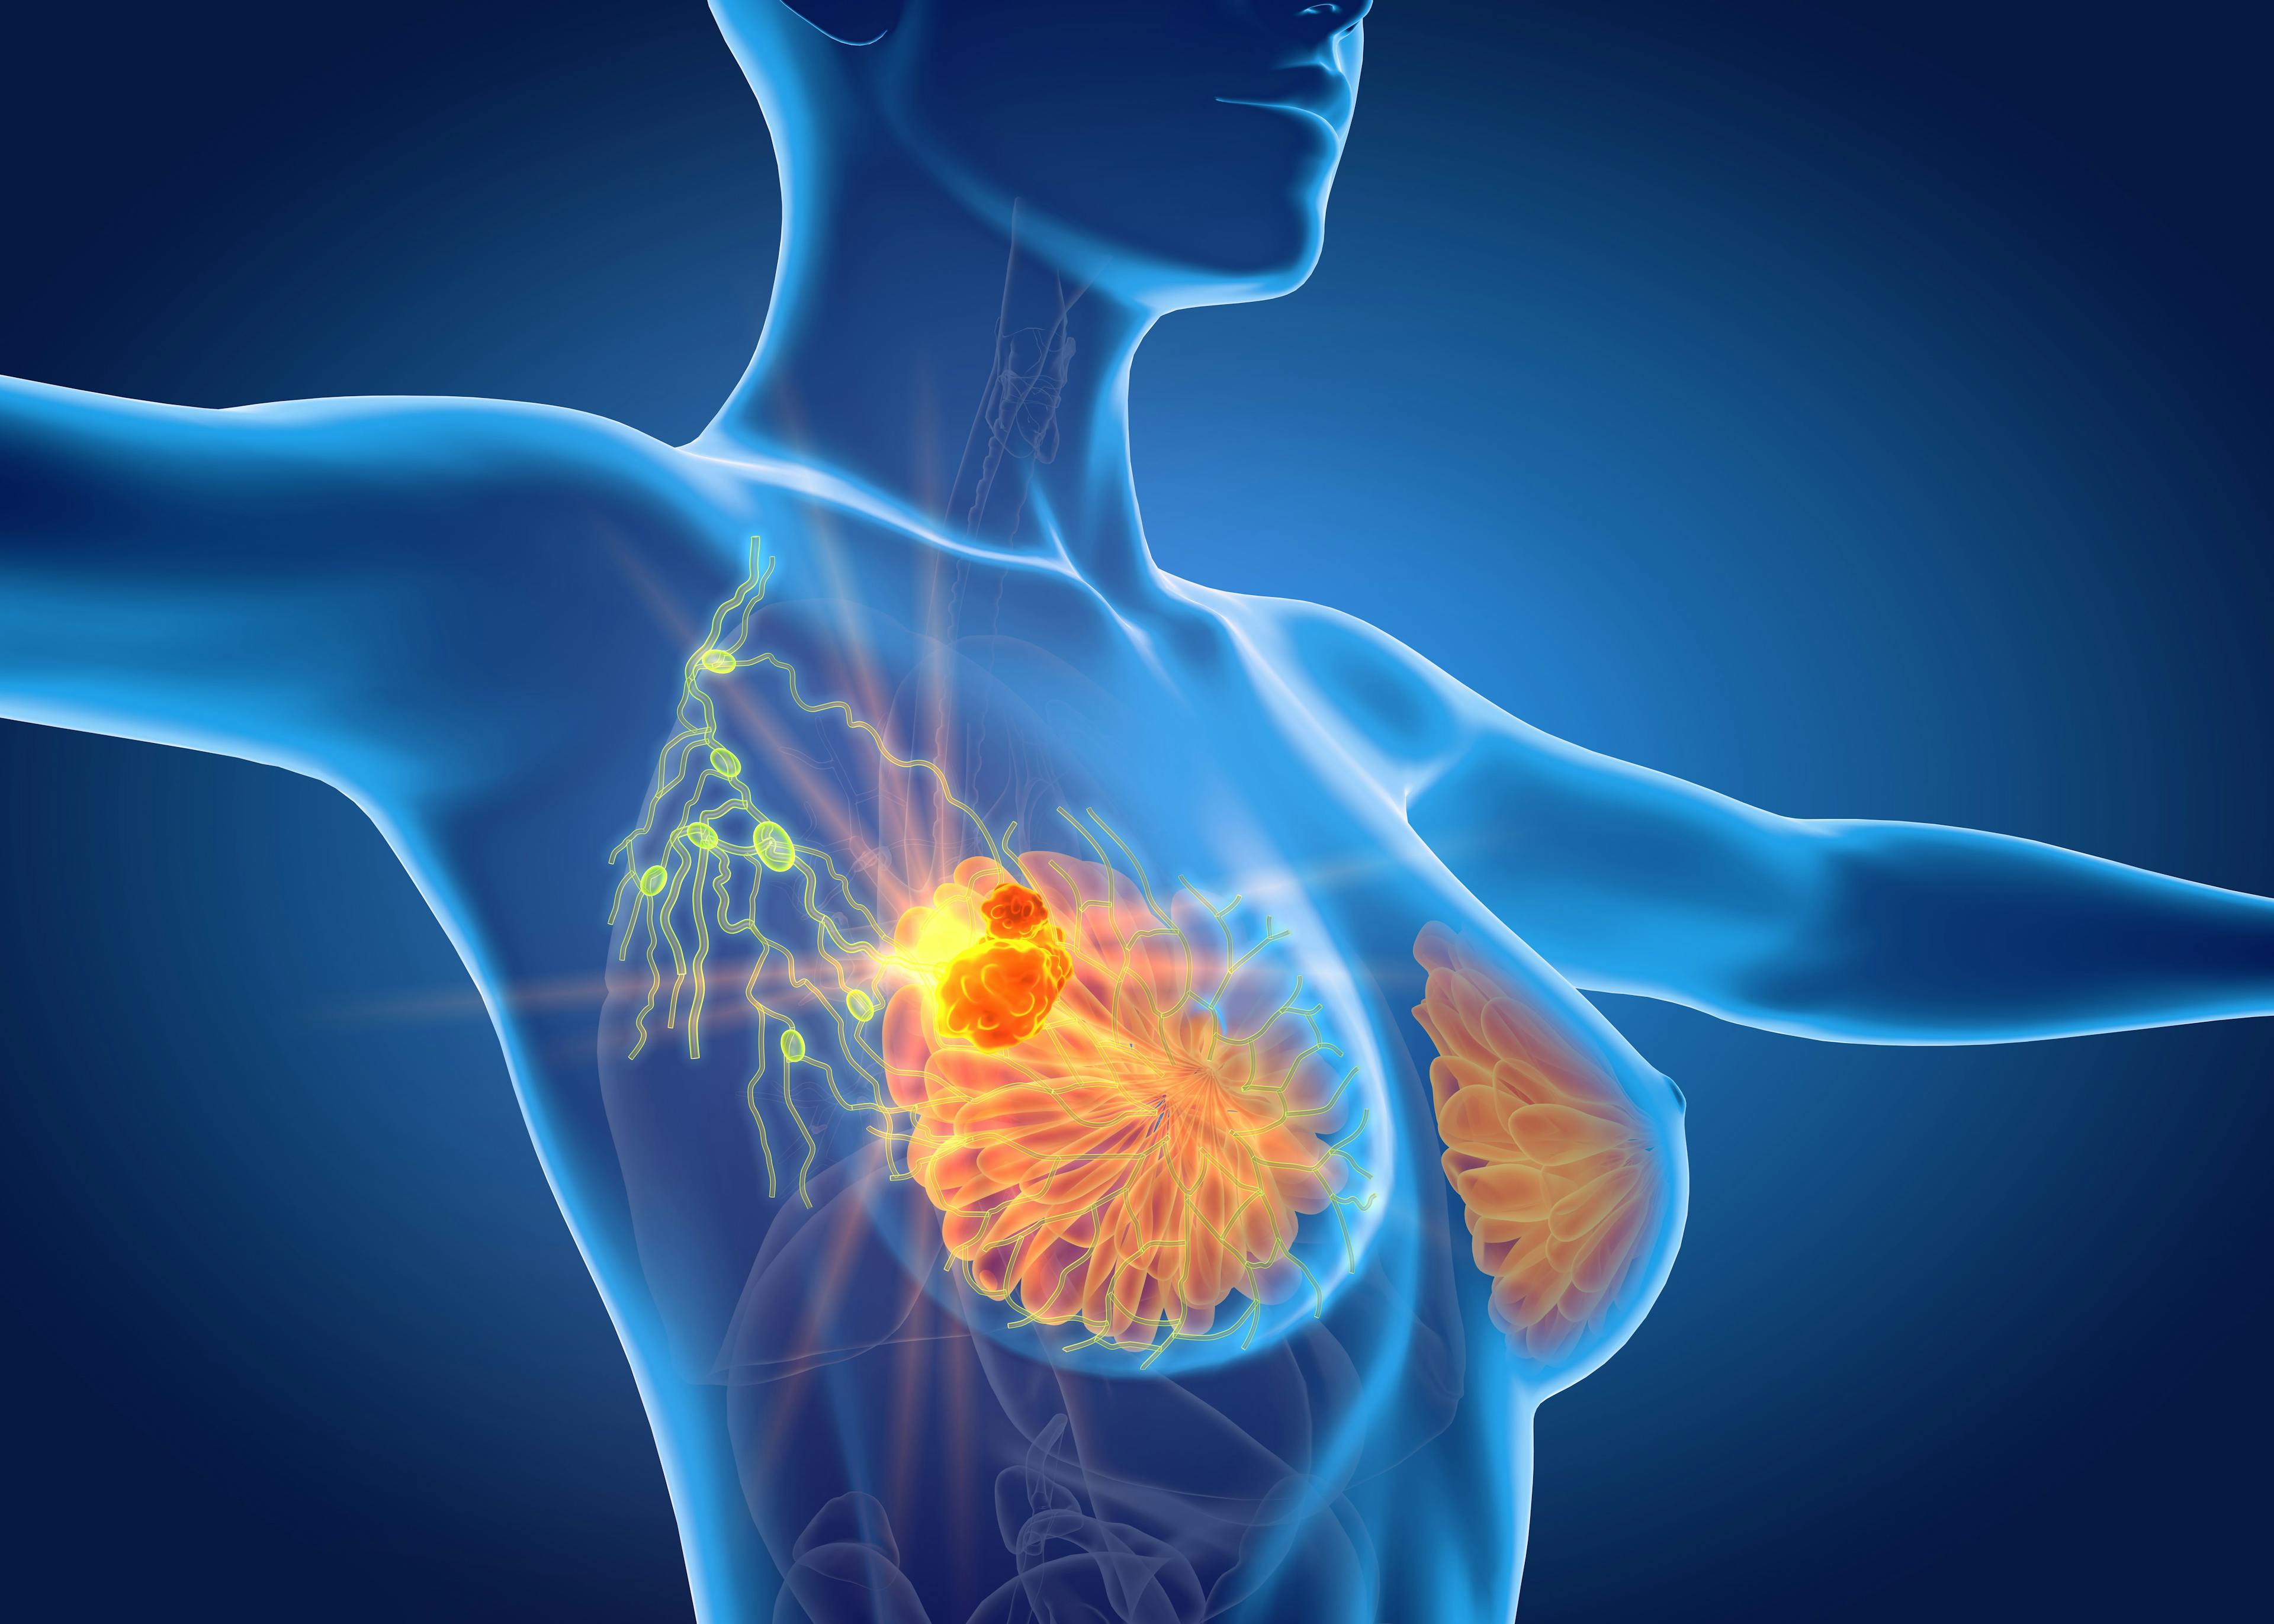 Trastuzumab Deruxtecan Doubles PFS in HER2-Low Metastatic Breast Cancer